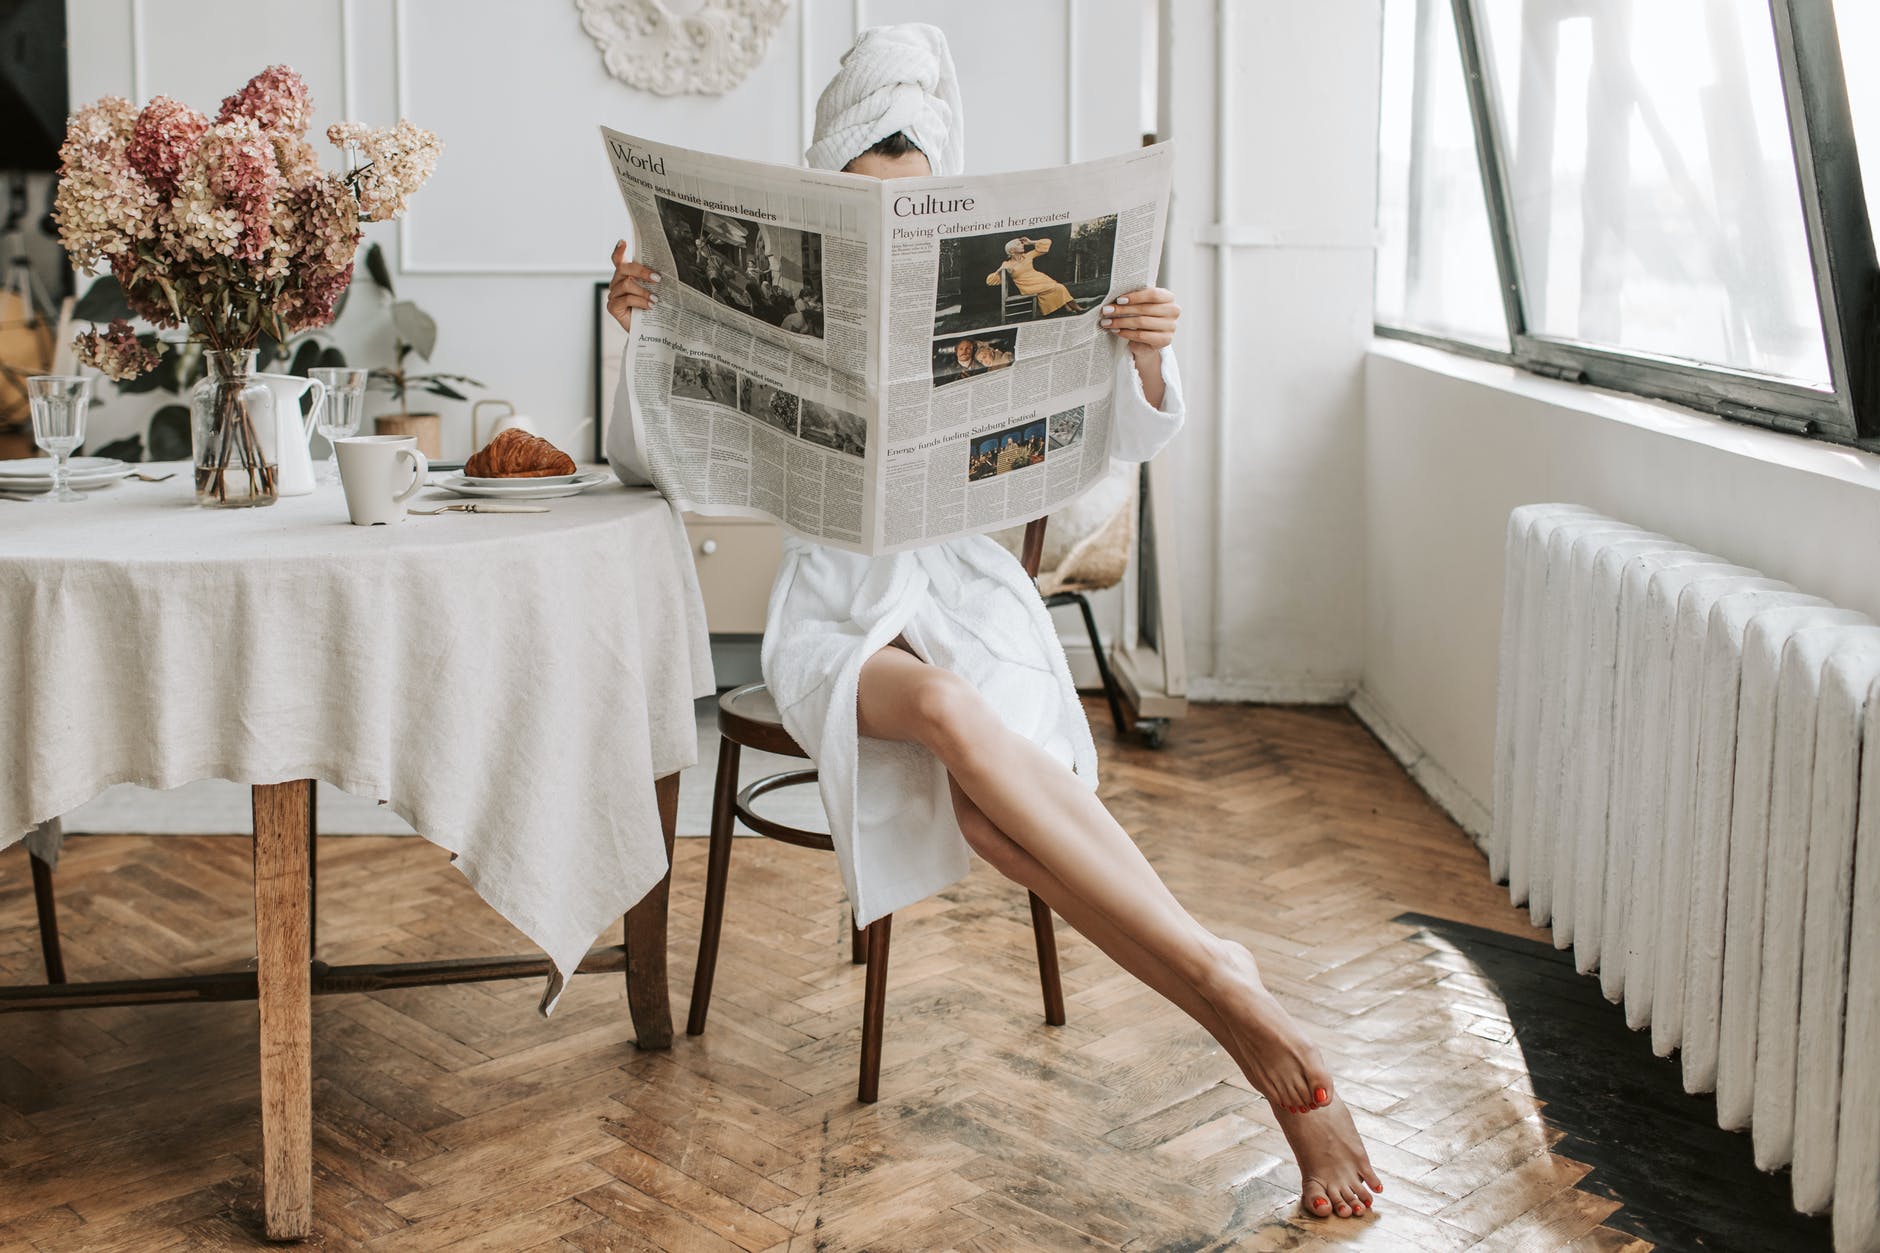 tko si ti,

woman in white robe sitting on a chair while reading